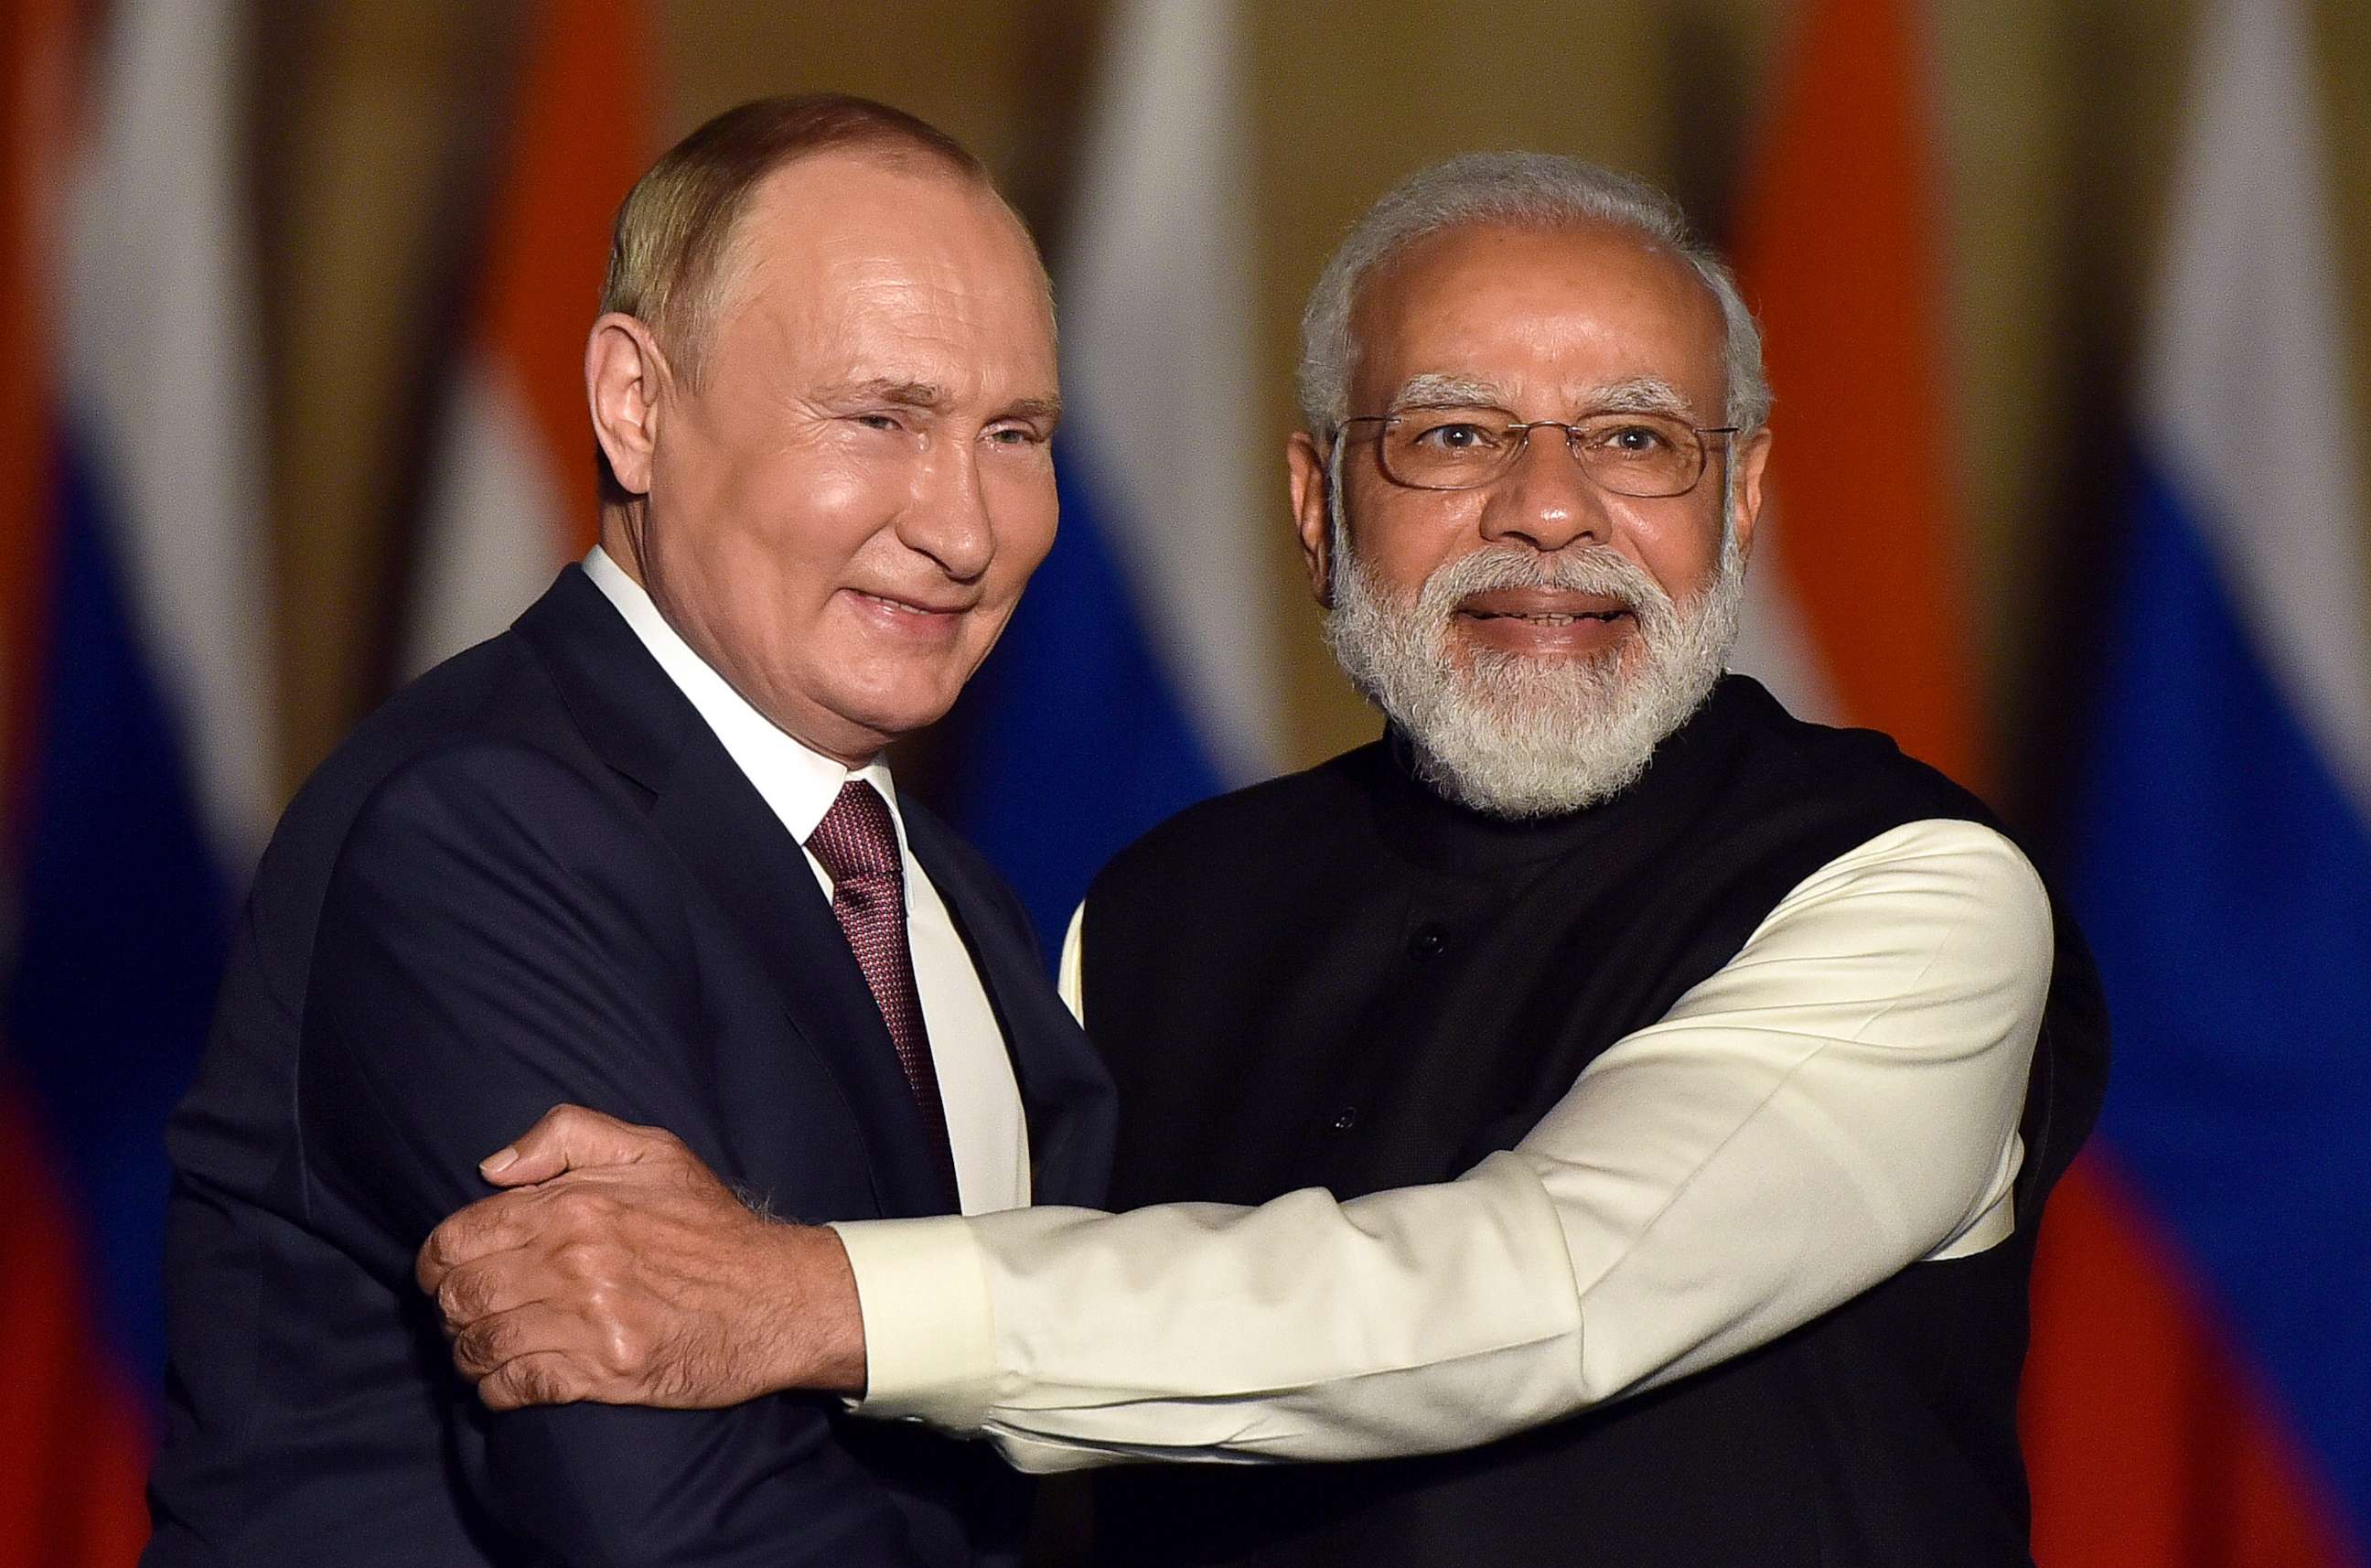 PHOTO: Prime Minister Narendra Modi with Russian President Vladimir Putin prior to their delegation meeting at Hyderabad House, Dec. 6, 2021 in New Delhi, India.